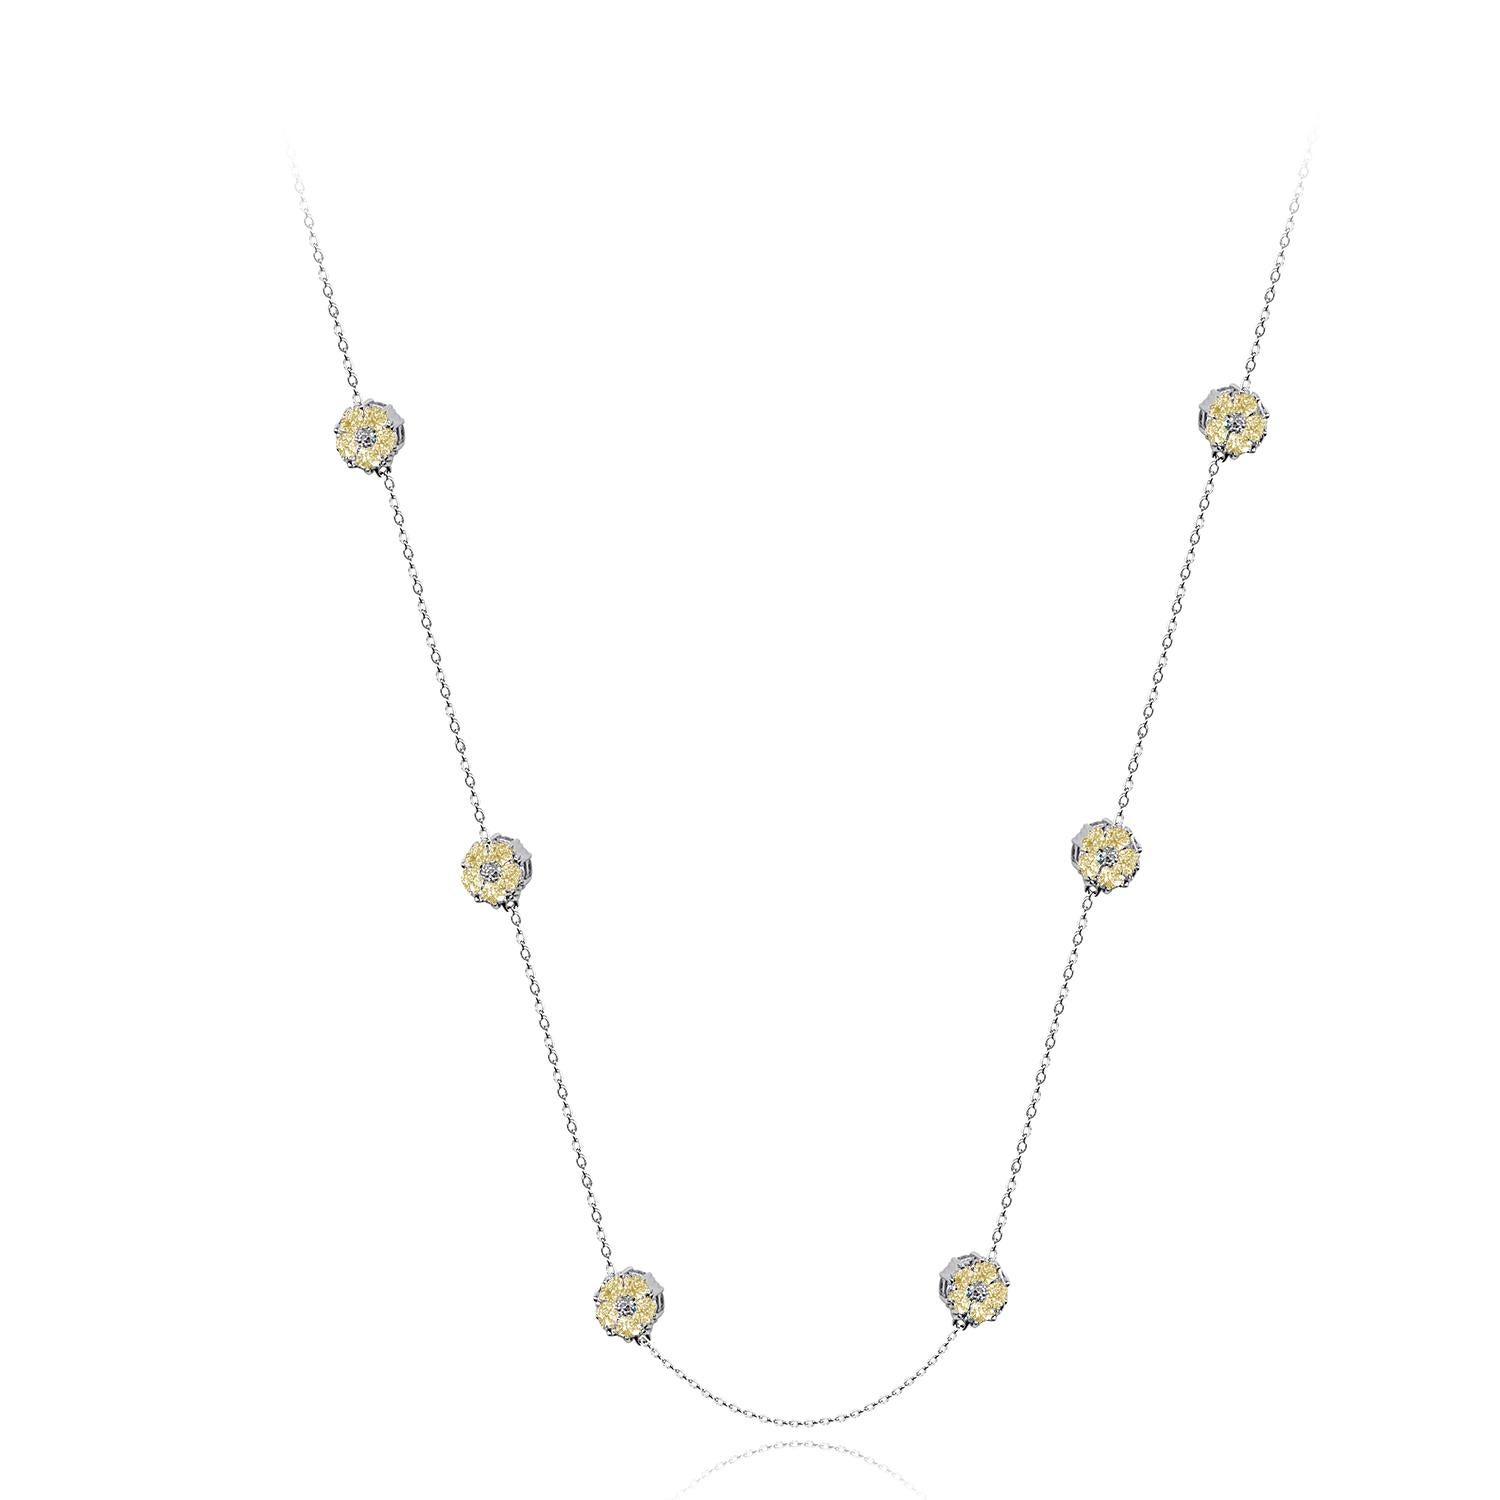 Women's Medium Doublesided Blossom Chain Necklace For Sale